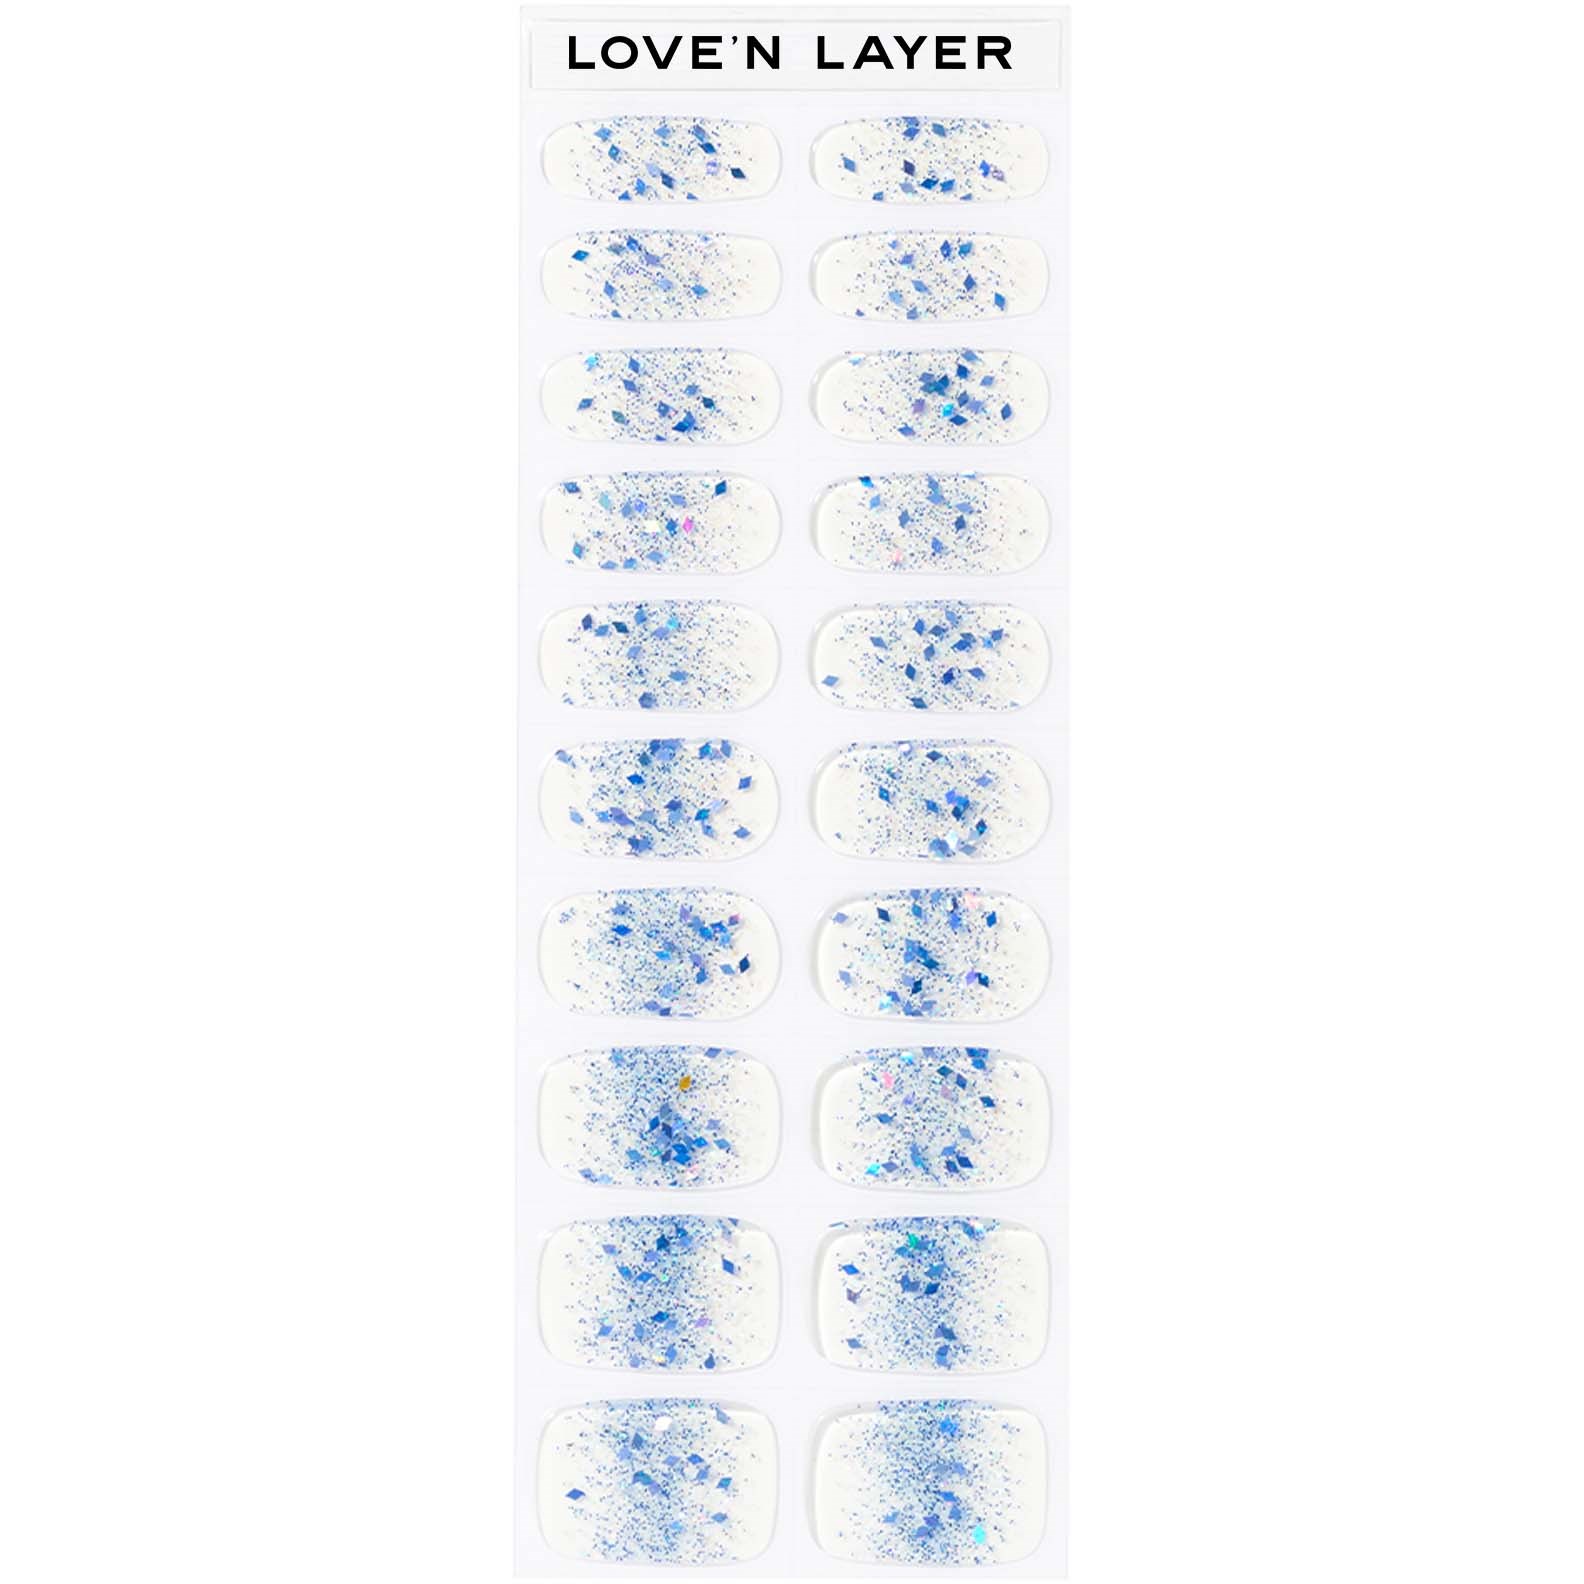 Loven Layer Love Note Funky Sparkle Blue